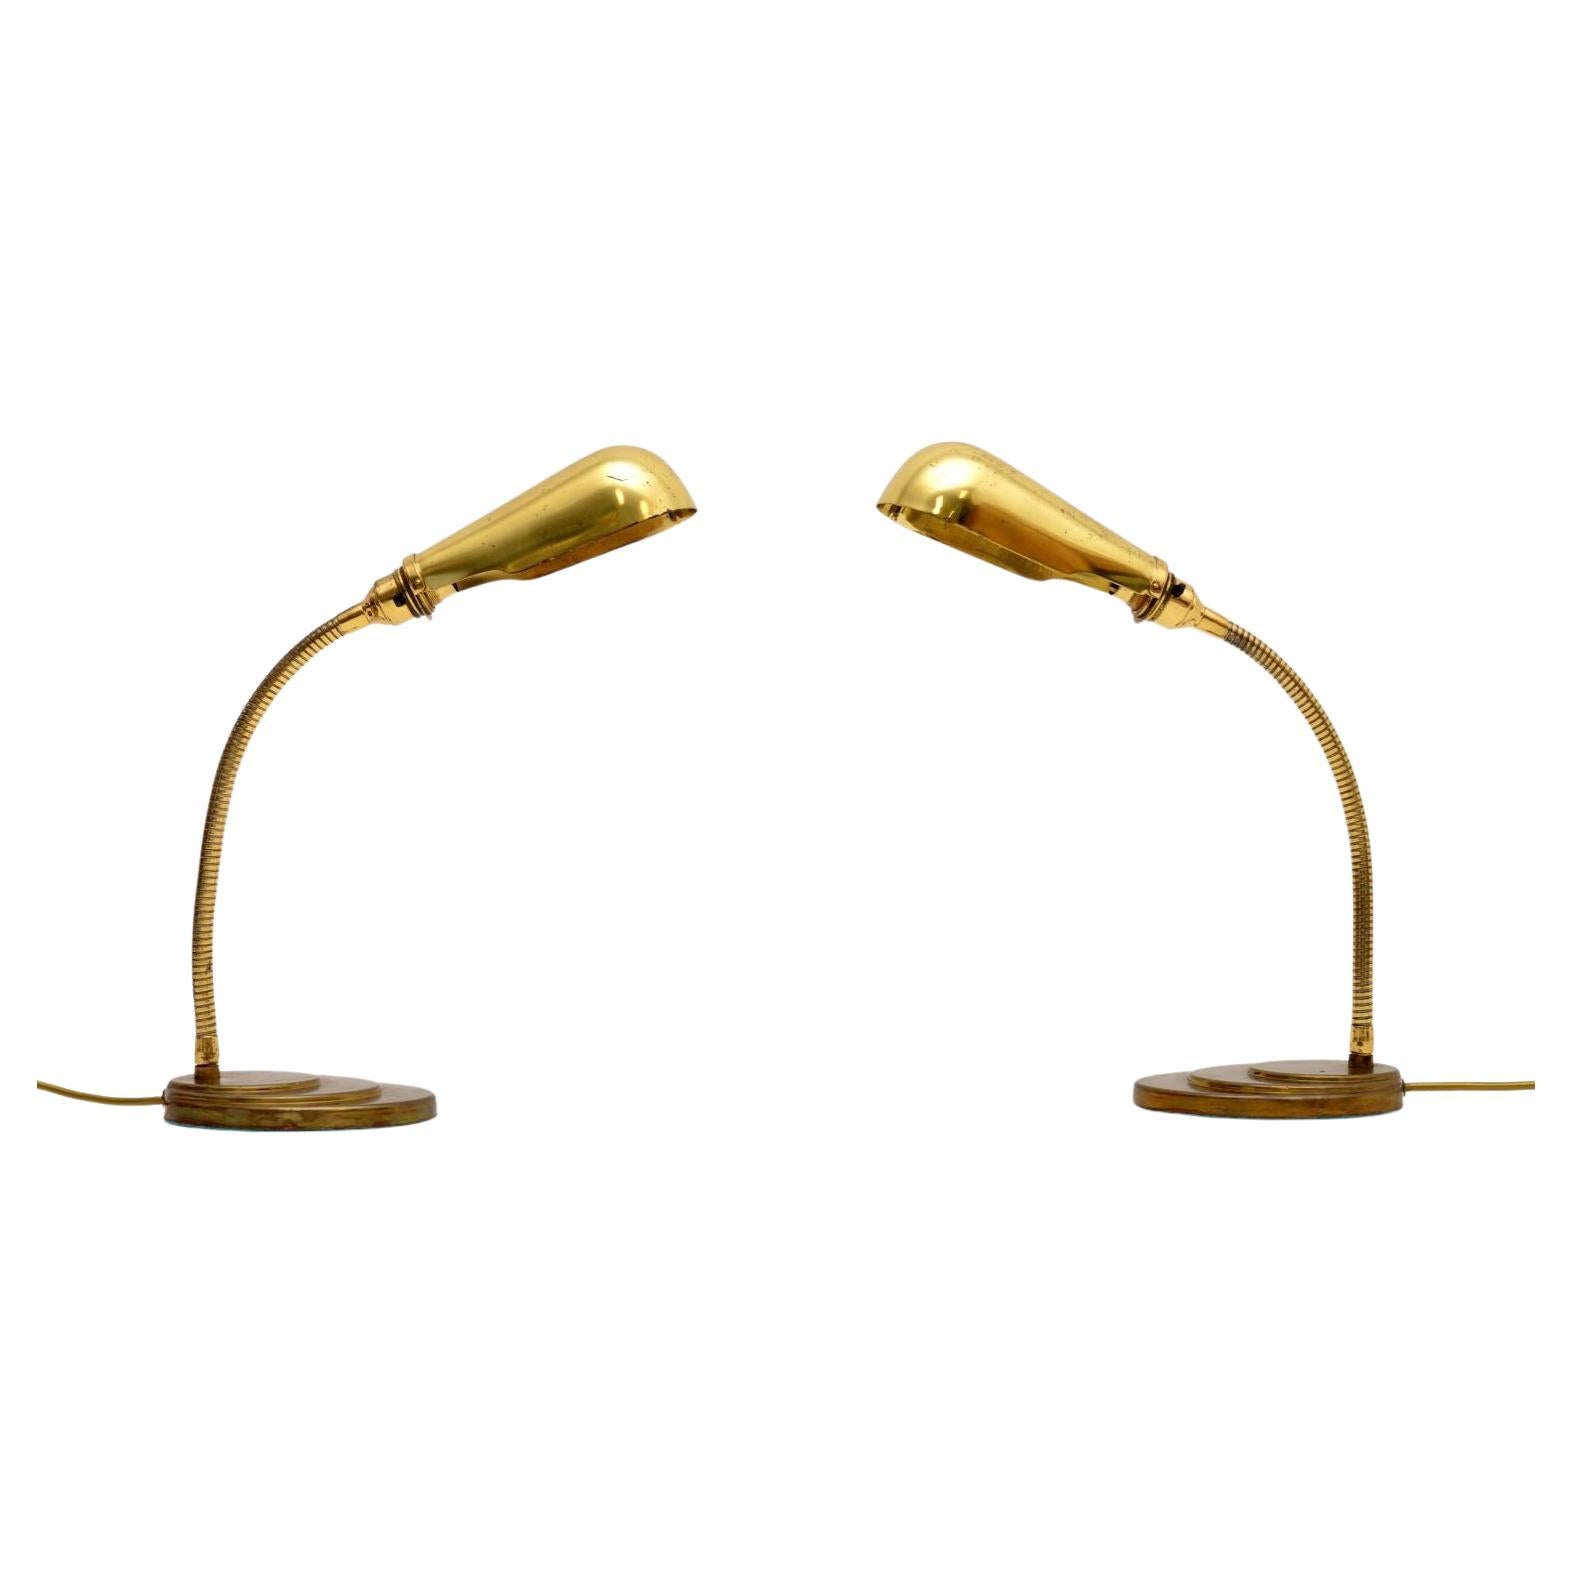 A wonderful pair of vintage brass goose neck table lamps. They were made in England, they date from the 1960-70’s.

The quality is fantastic, they are a lovely size and have a very useful design. The necks are adjustable, the shades also